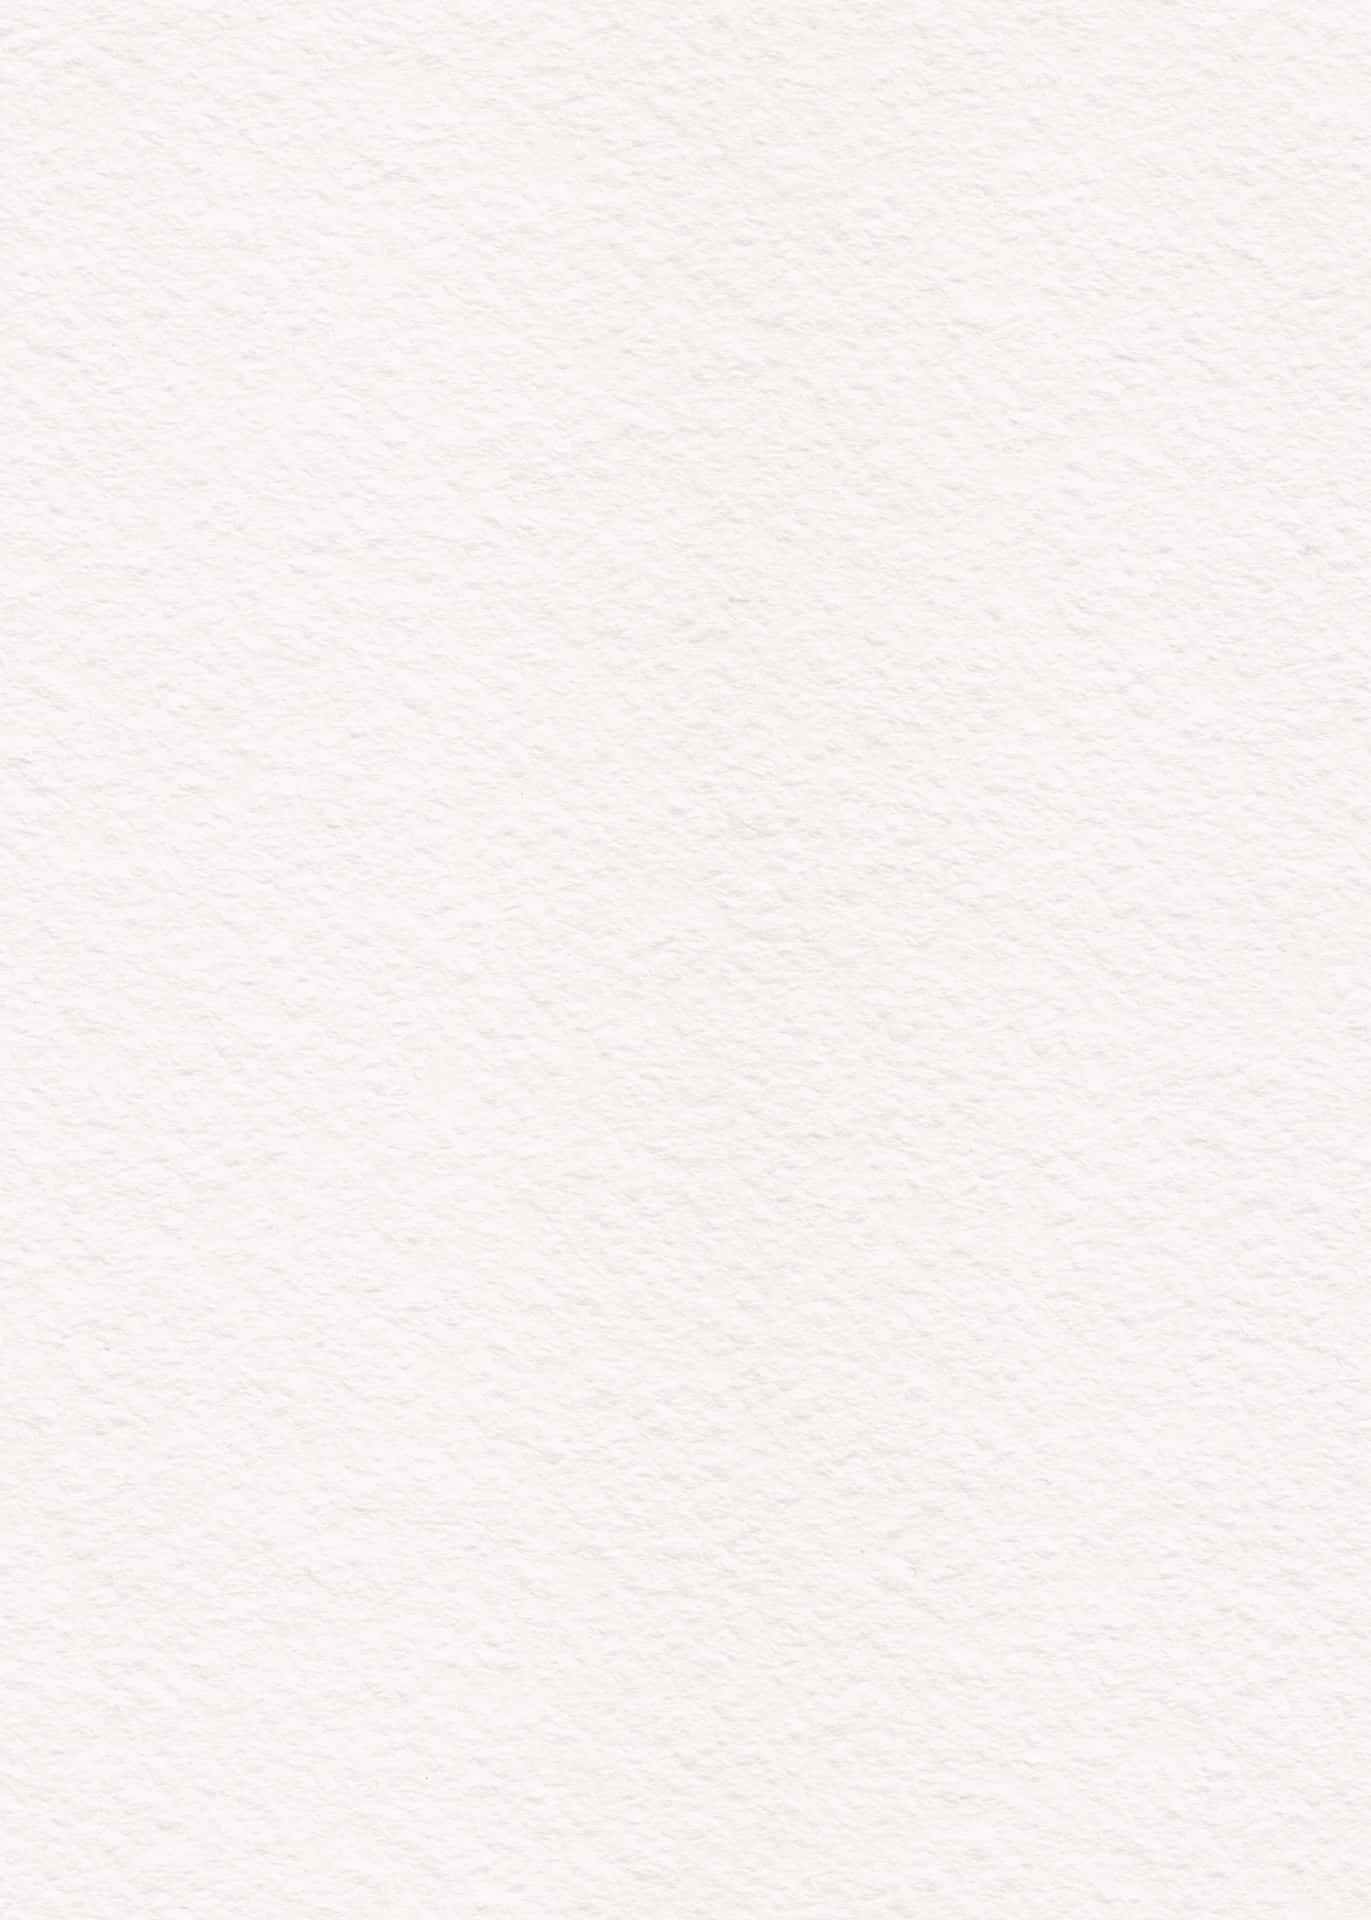 White Watercolor Paper Texture Background